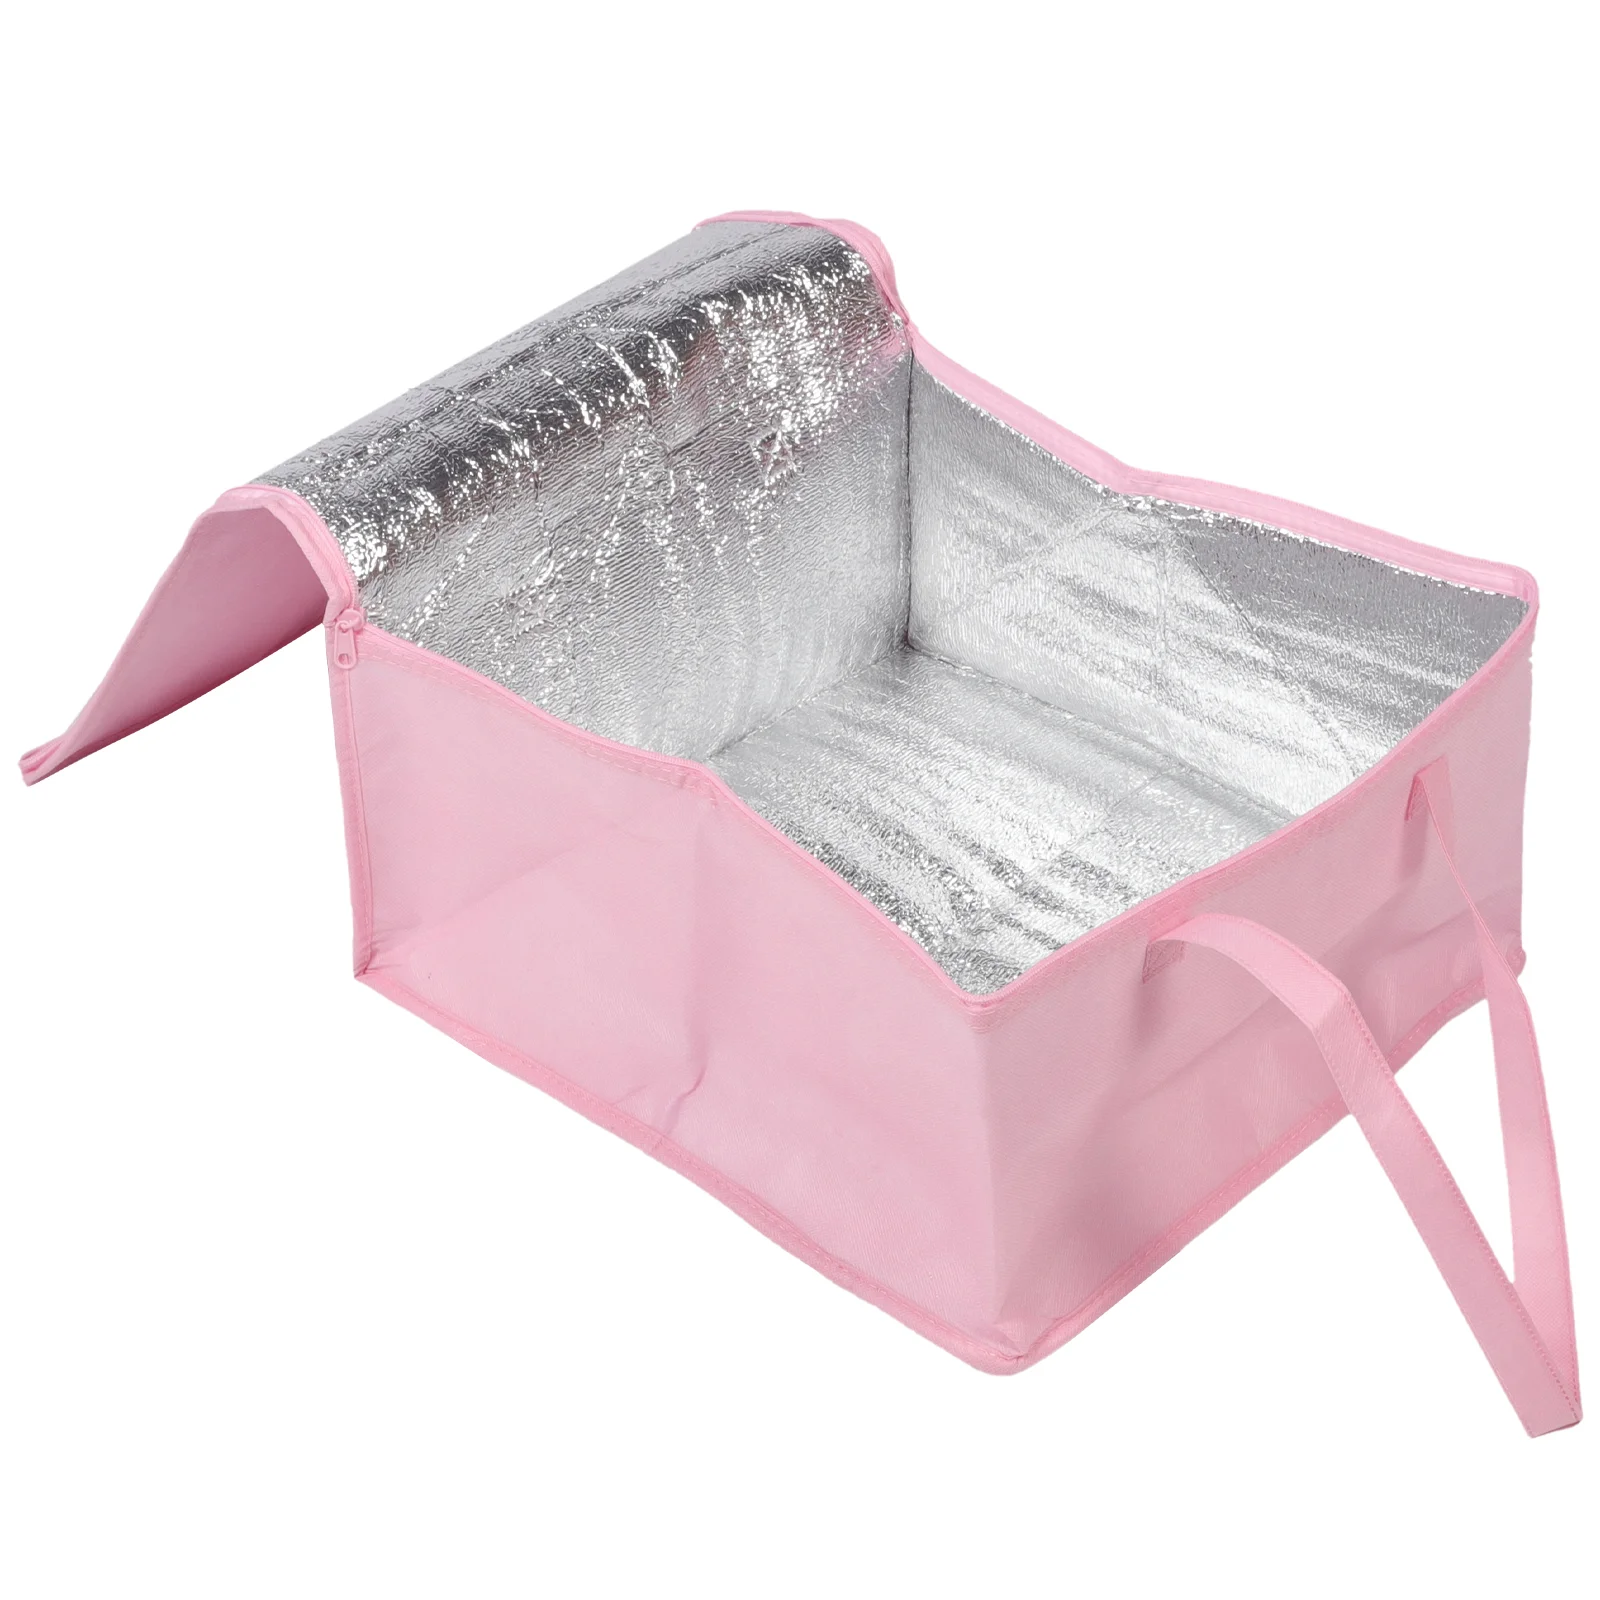 

Cake Insulation Bag Insulated Packing Catering Handle Thicken Food Portable Non-woven Bags Delivery